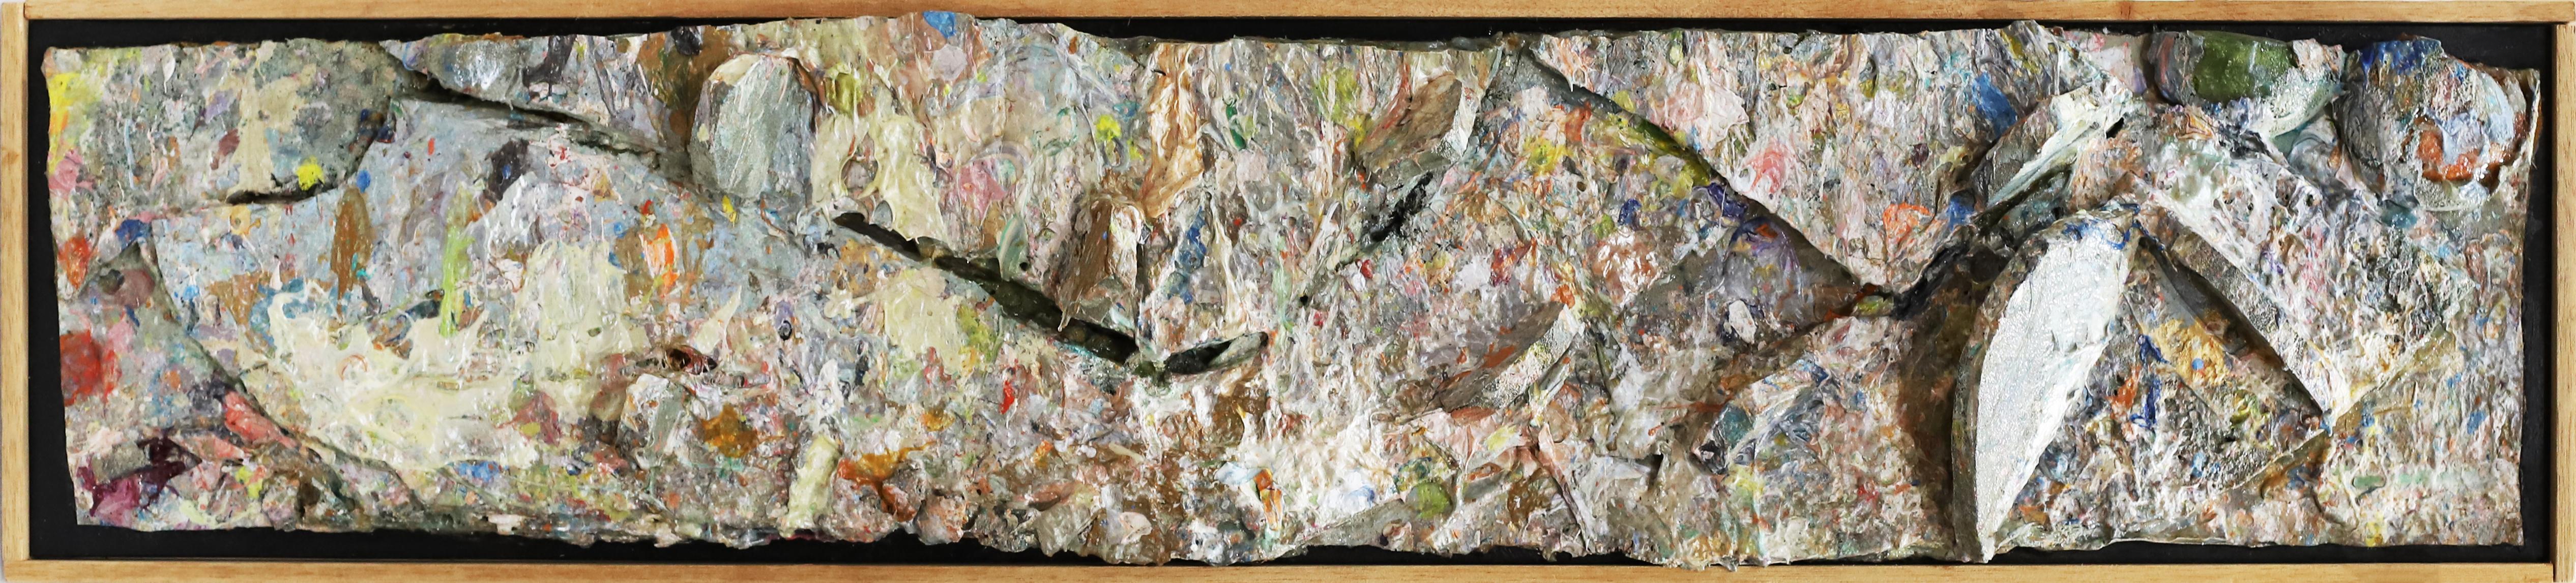  89AS-1 - Abstract Expressionist Painting by Larry Poons